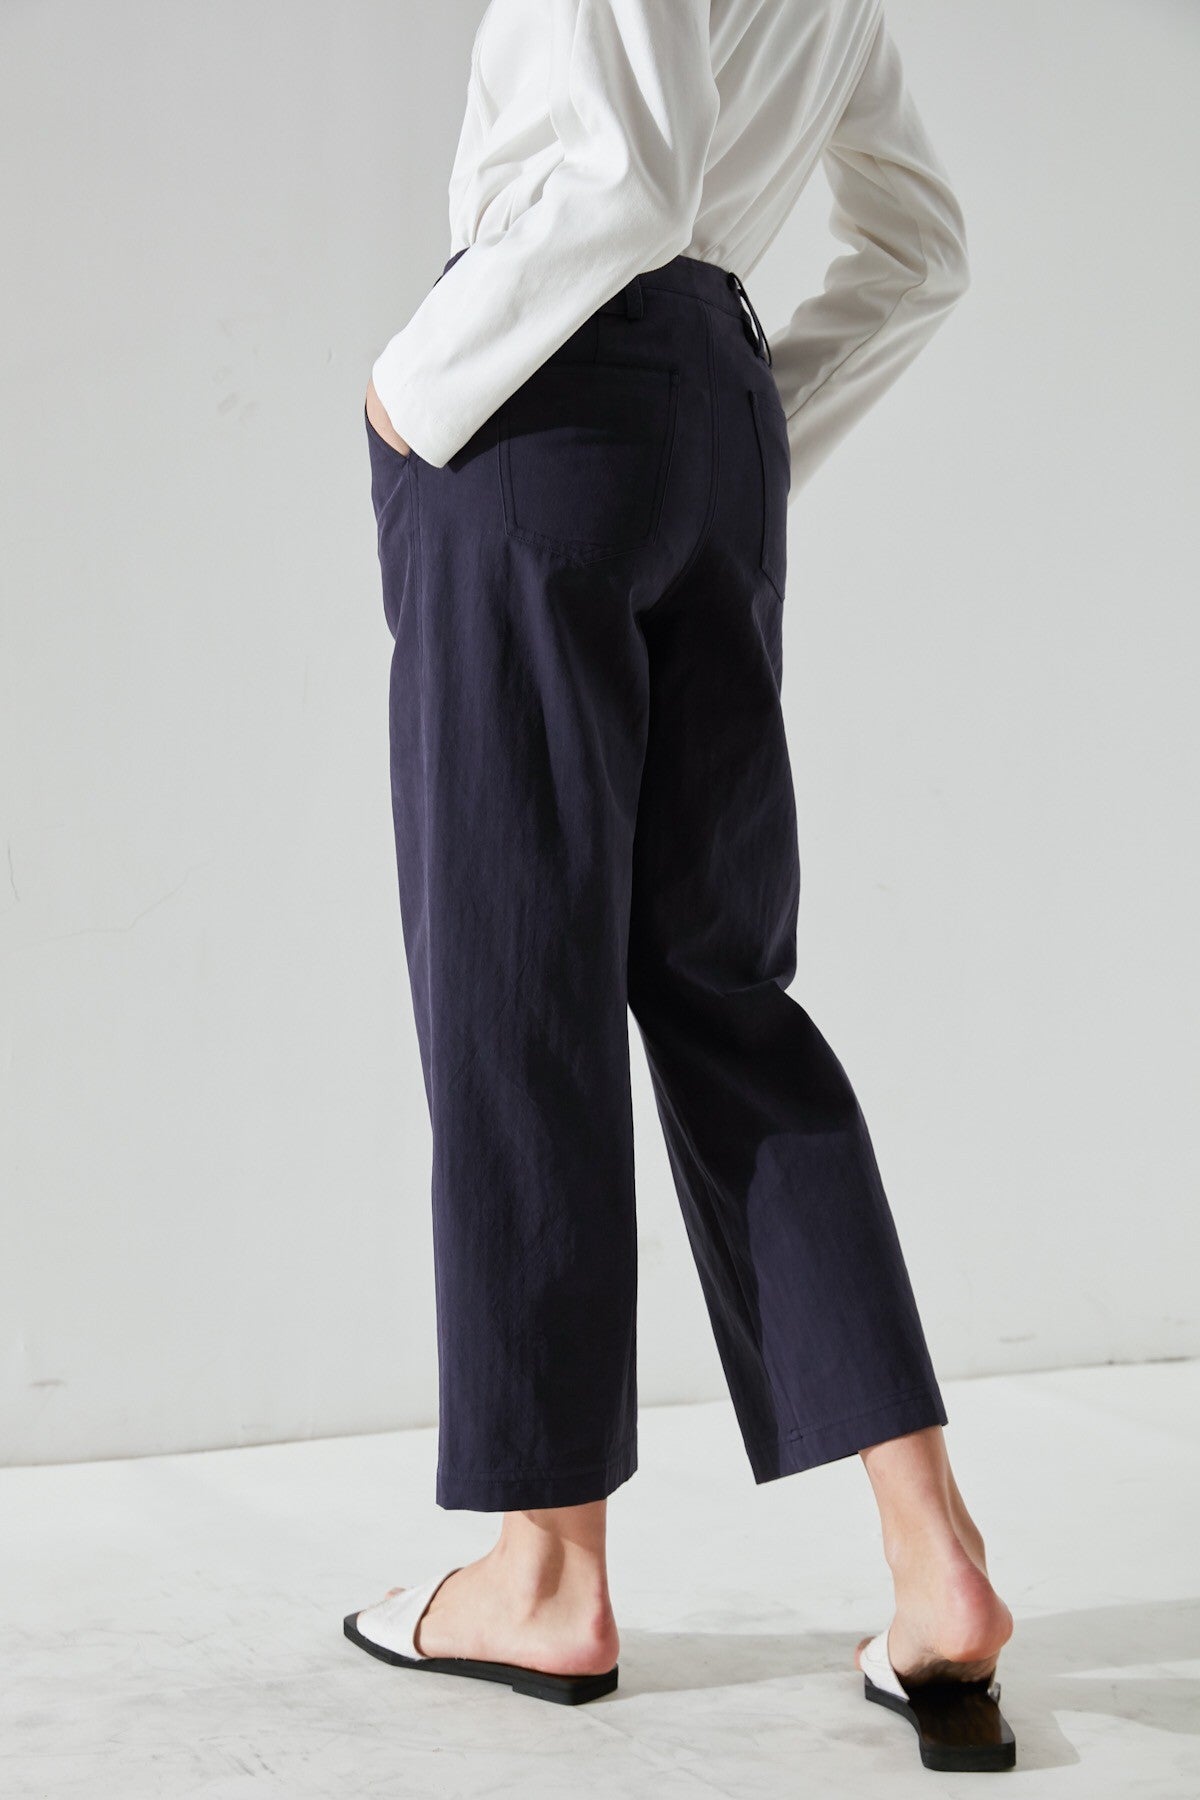 SKYE San Francisco SF California shop ethical sustainable modern minimalist quality women clothing fashion Fayette Cropped Pants 4